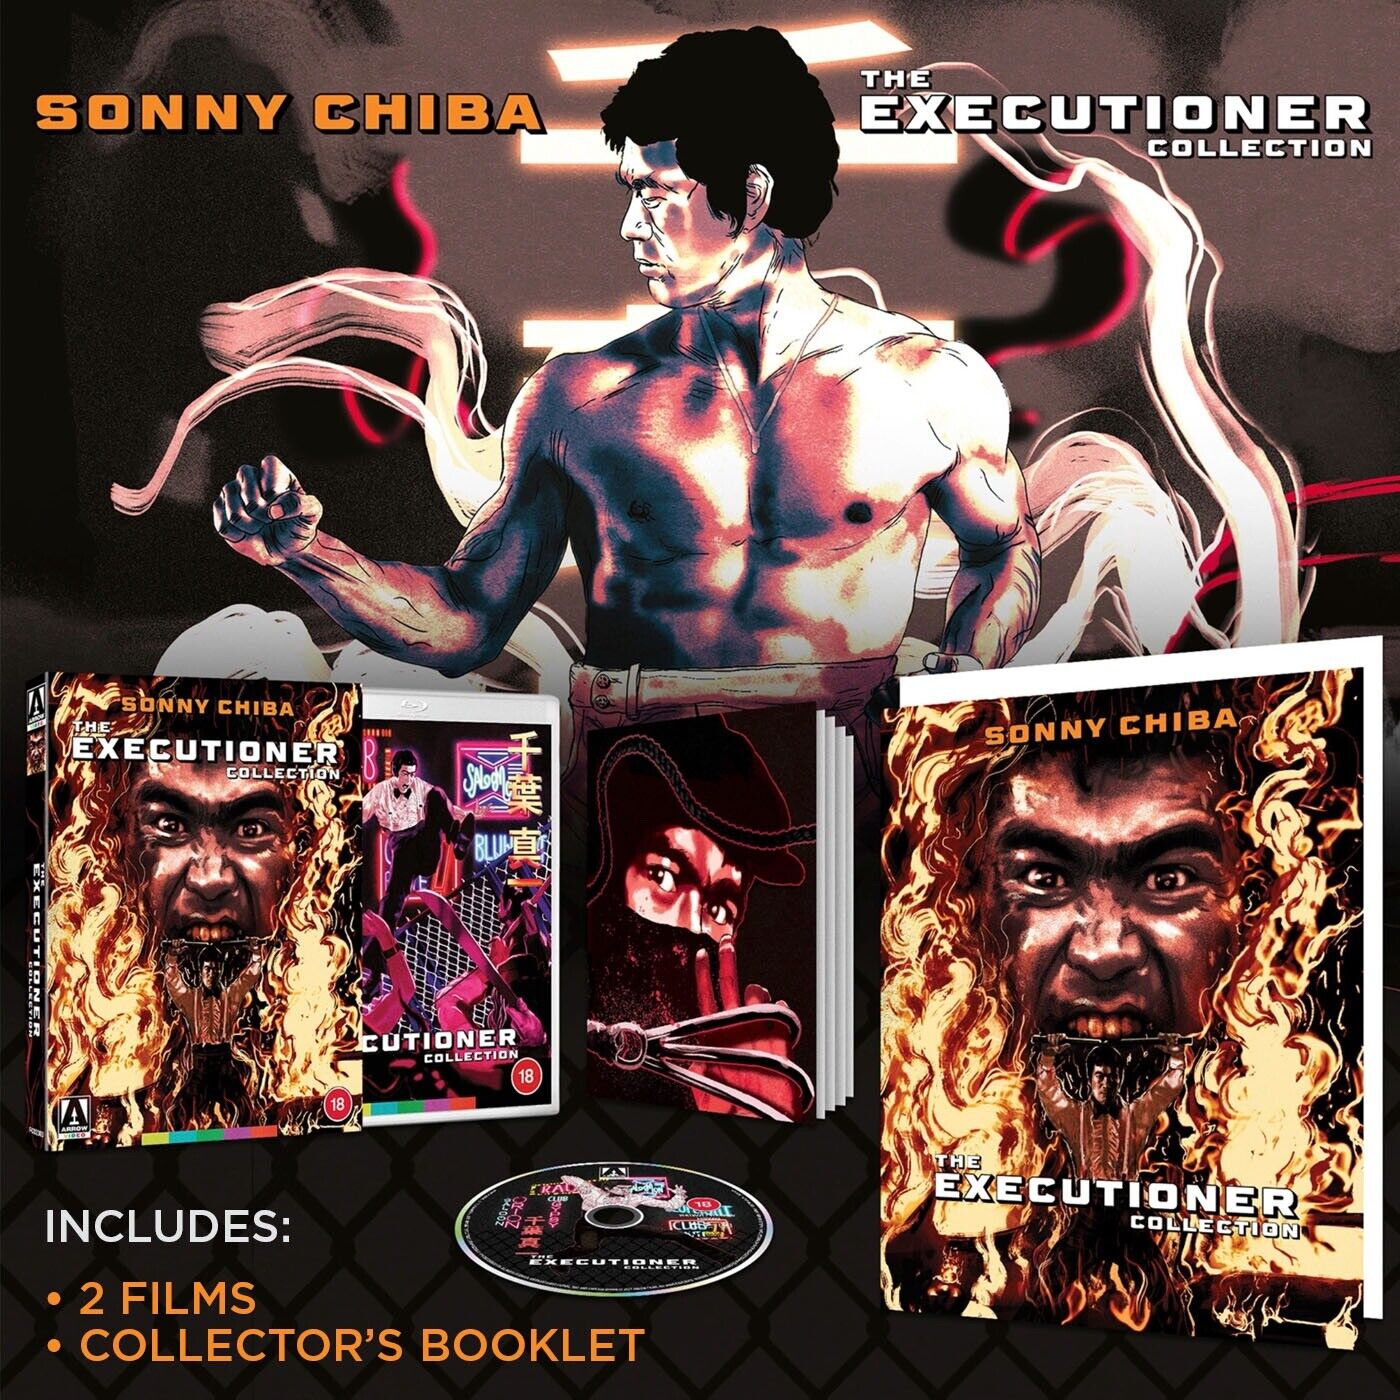 Executioner Collection Sonny Chiba Karate Inferno II 2 Blu-ray Arrow Street Fighter